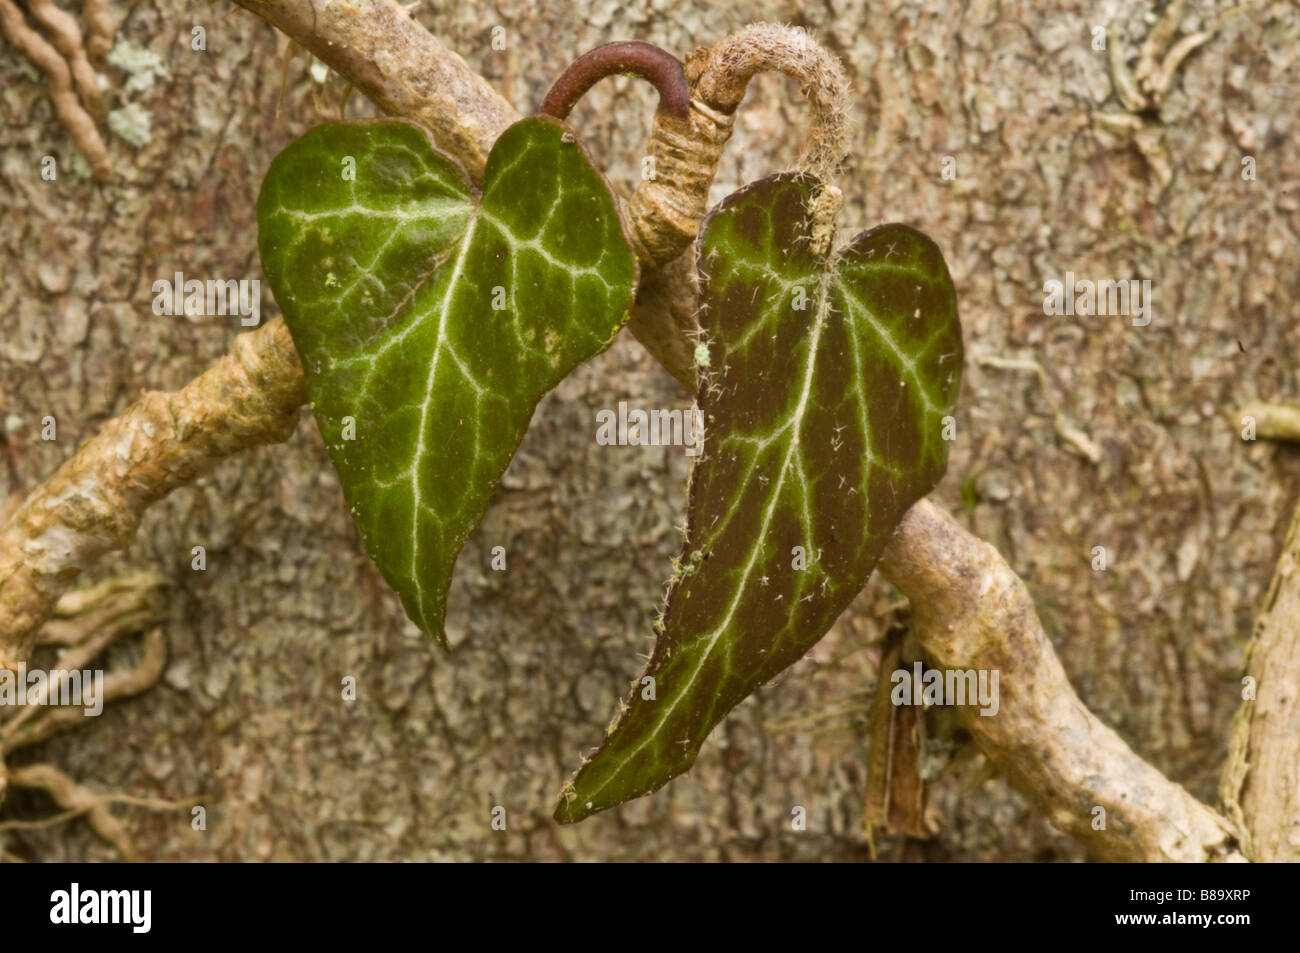 Ivy Leaves shaped like a heart growing on a tree trunk Stock Photo